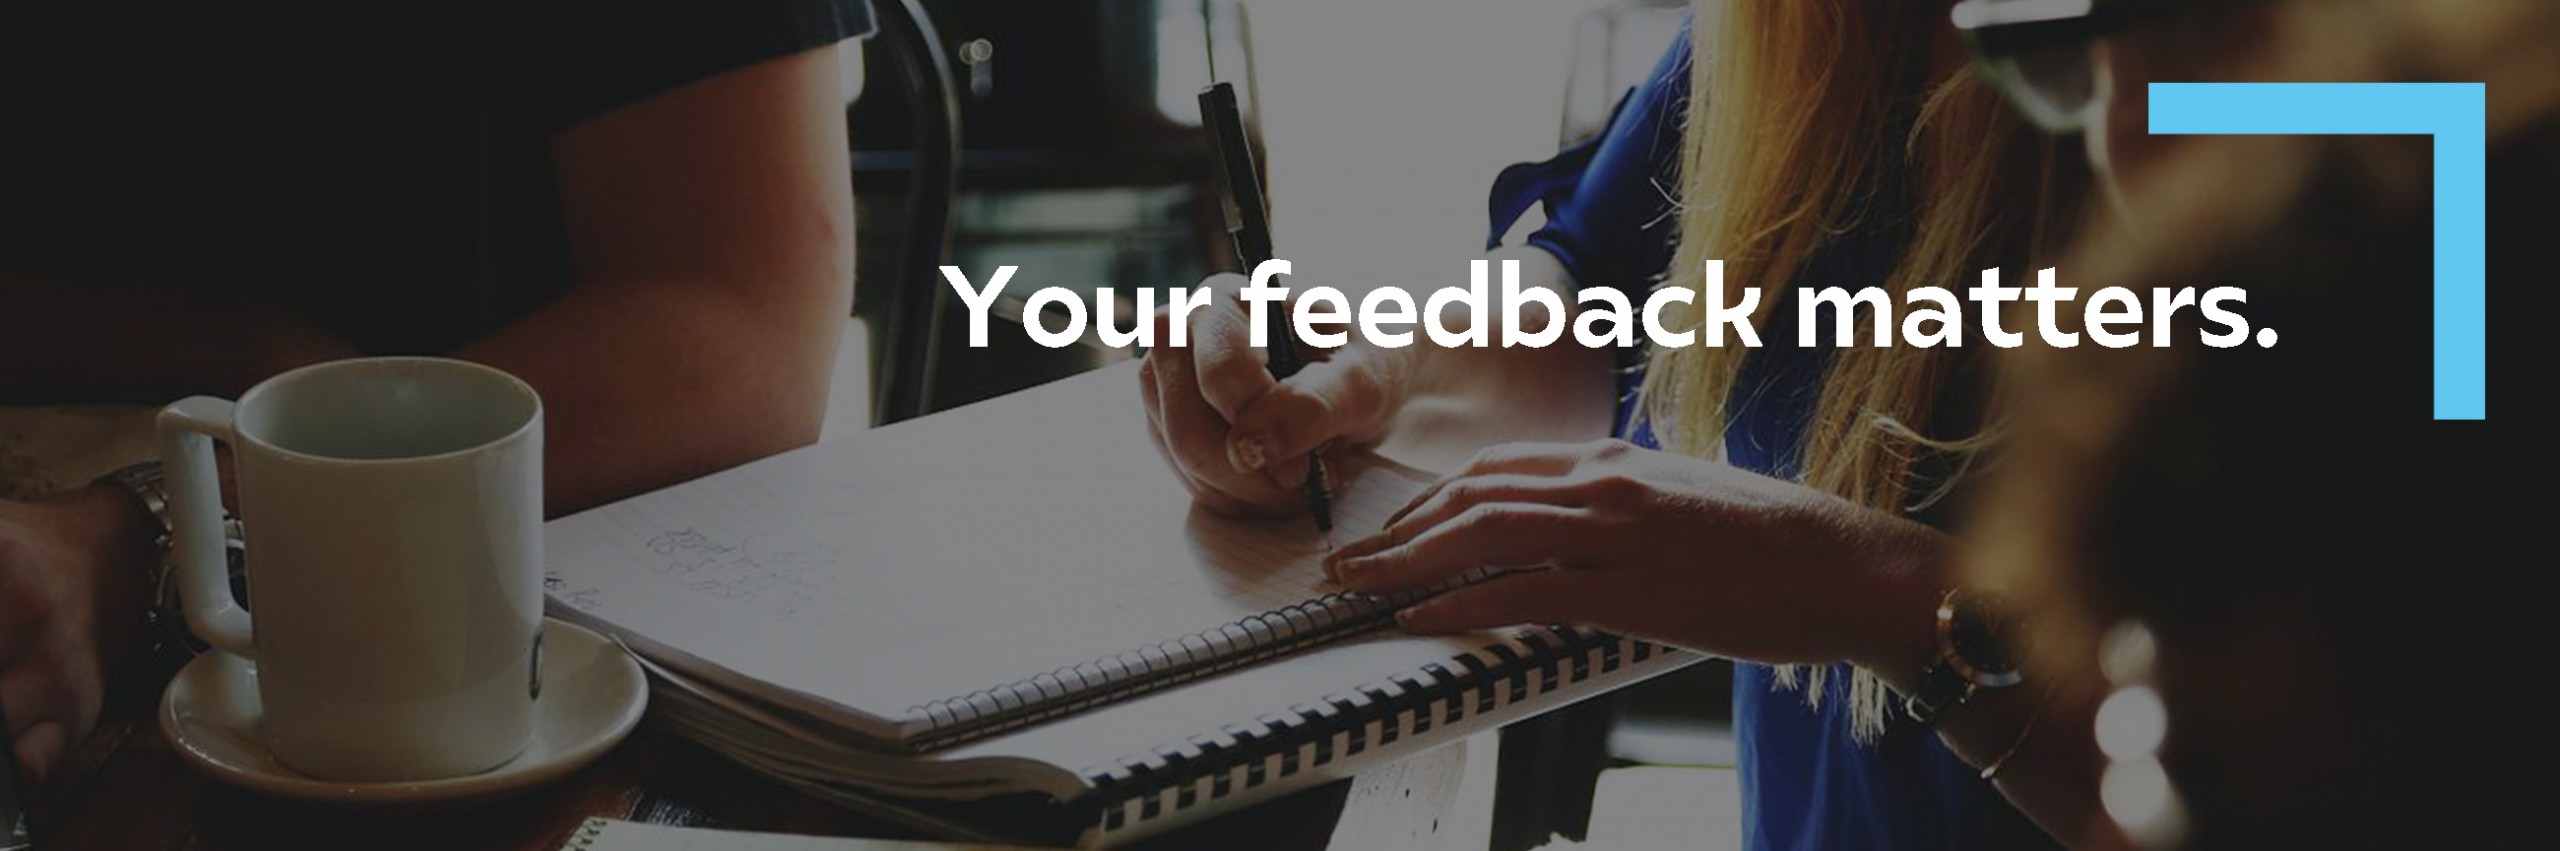 Your feedback matters on a photo were someone writes on a notebook